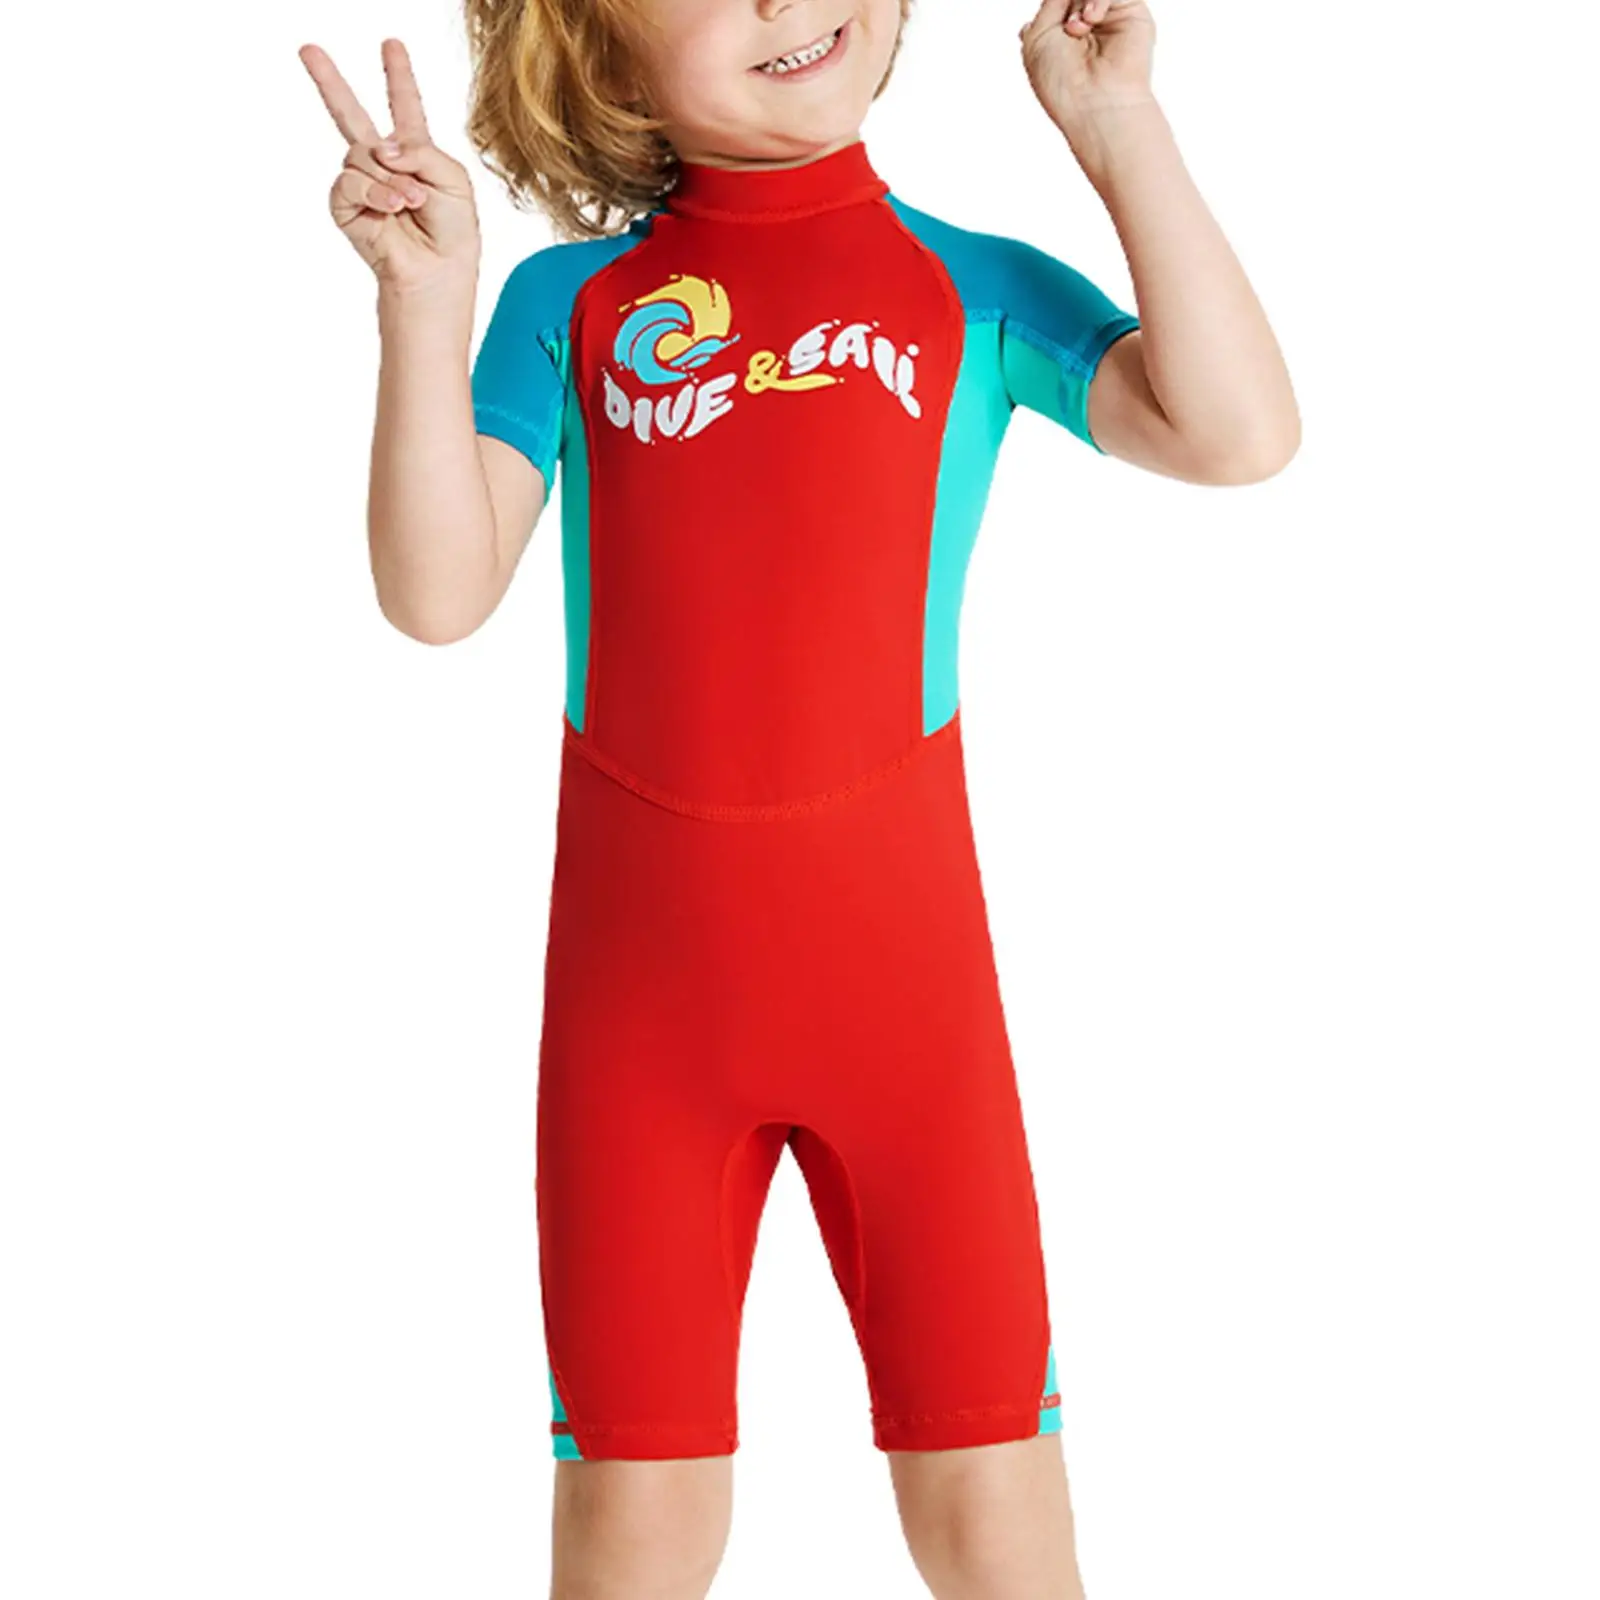 Kids Wetsuits Scuba Diving Suit Shorty Wetsuit for Diving Snorkeling Surfing XXL Red